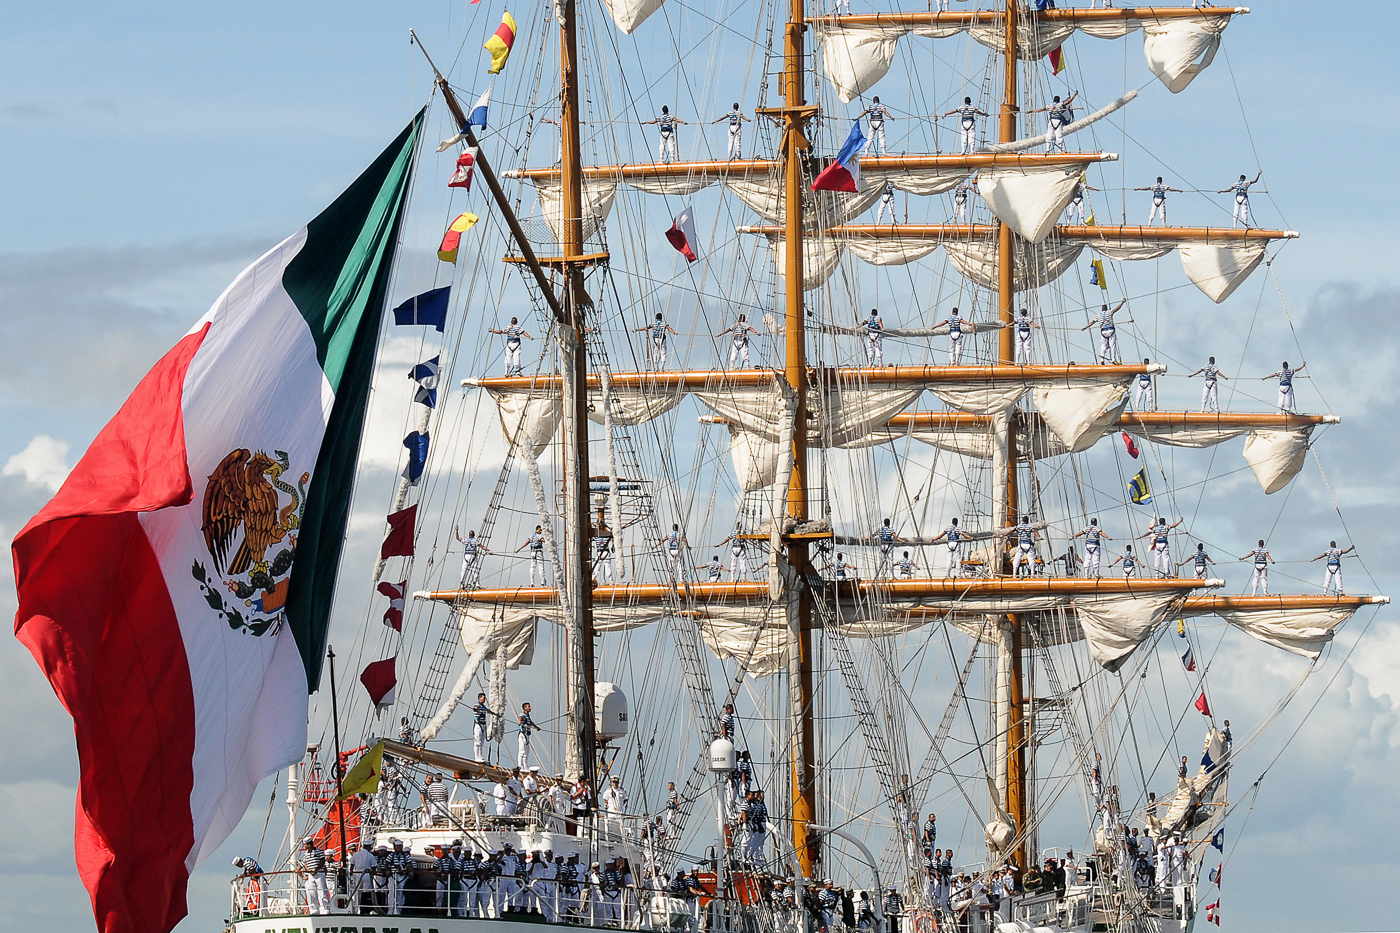 NAVAL SHOW. The crew on board the Mexican Navy training vessel Armada CuauhtÃ©moc (BE-01) as it docks at the Pier 15 in South Harbor, Manila on August 4, 2017 for a 5-day historic goodwill visit. Photo by Ben Nabong/Rappler  